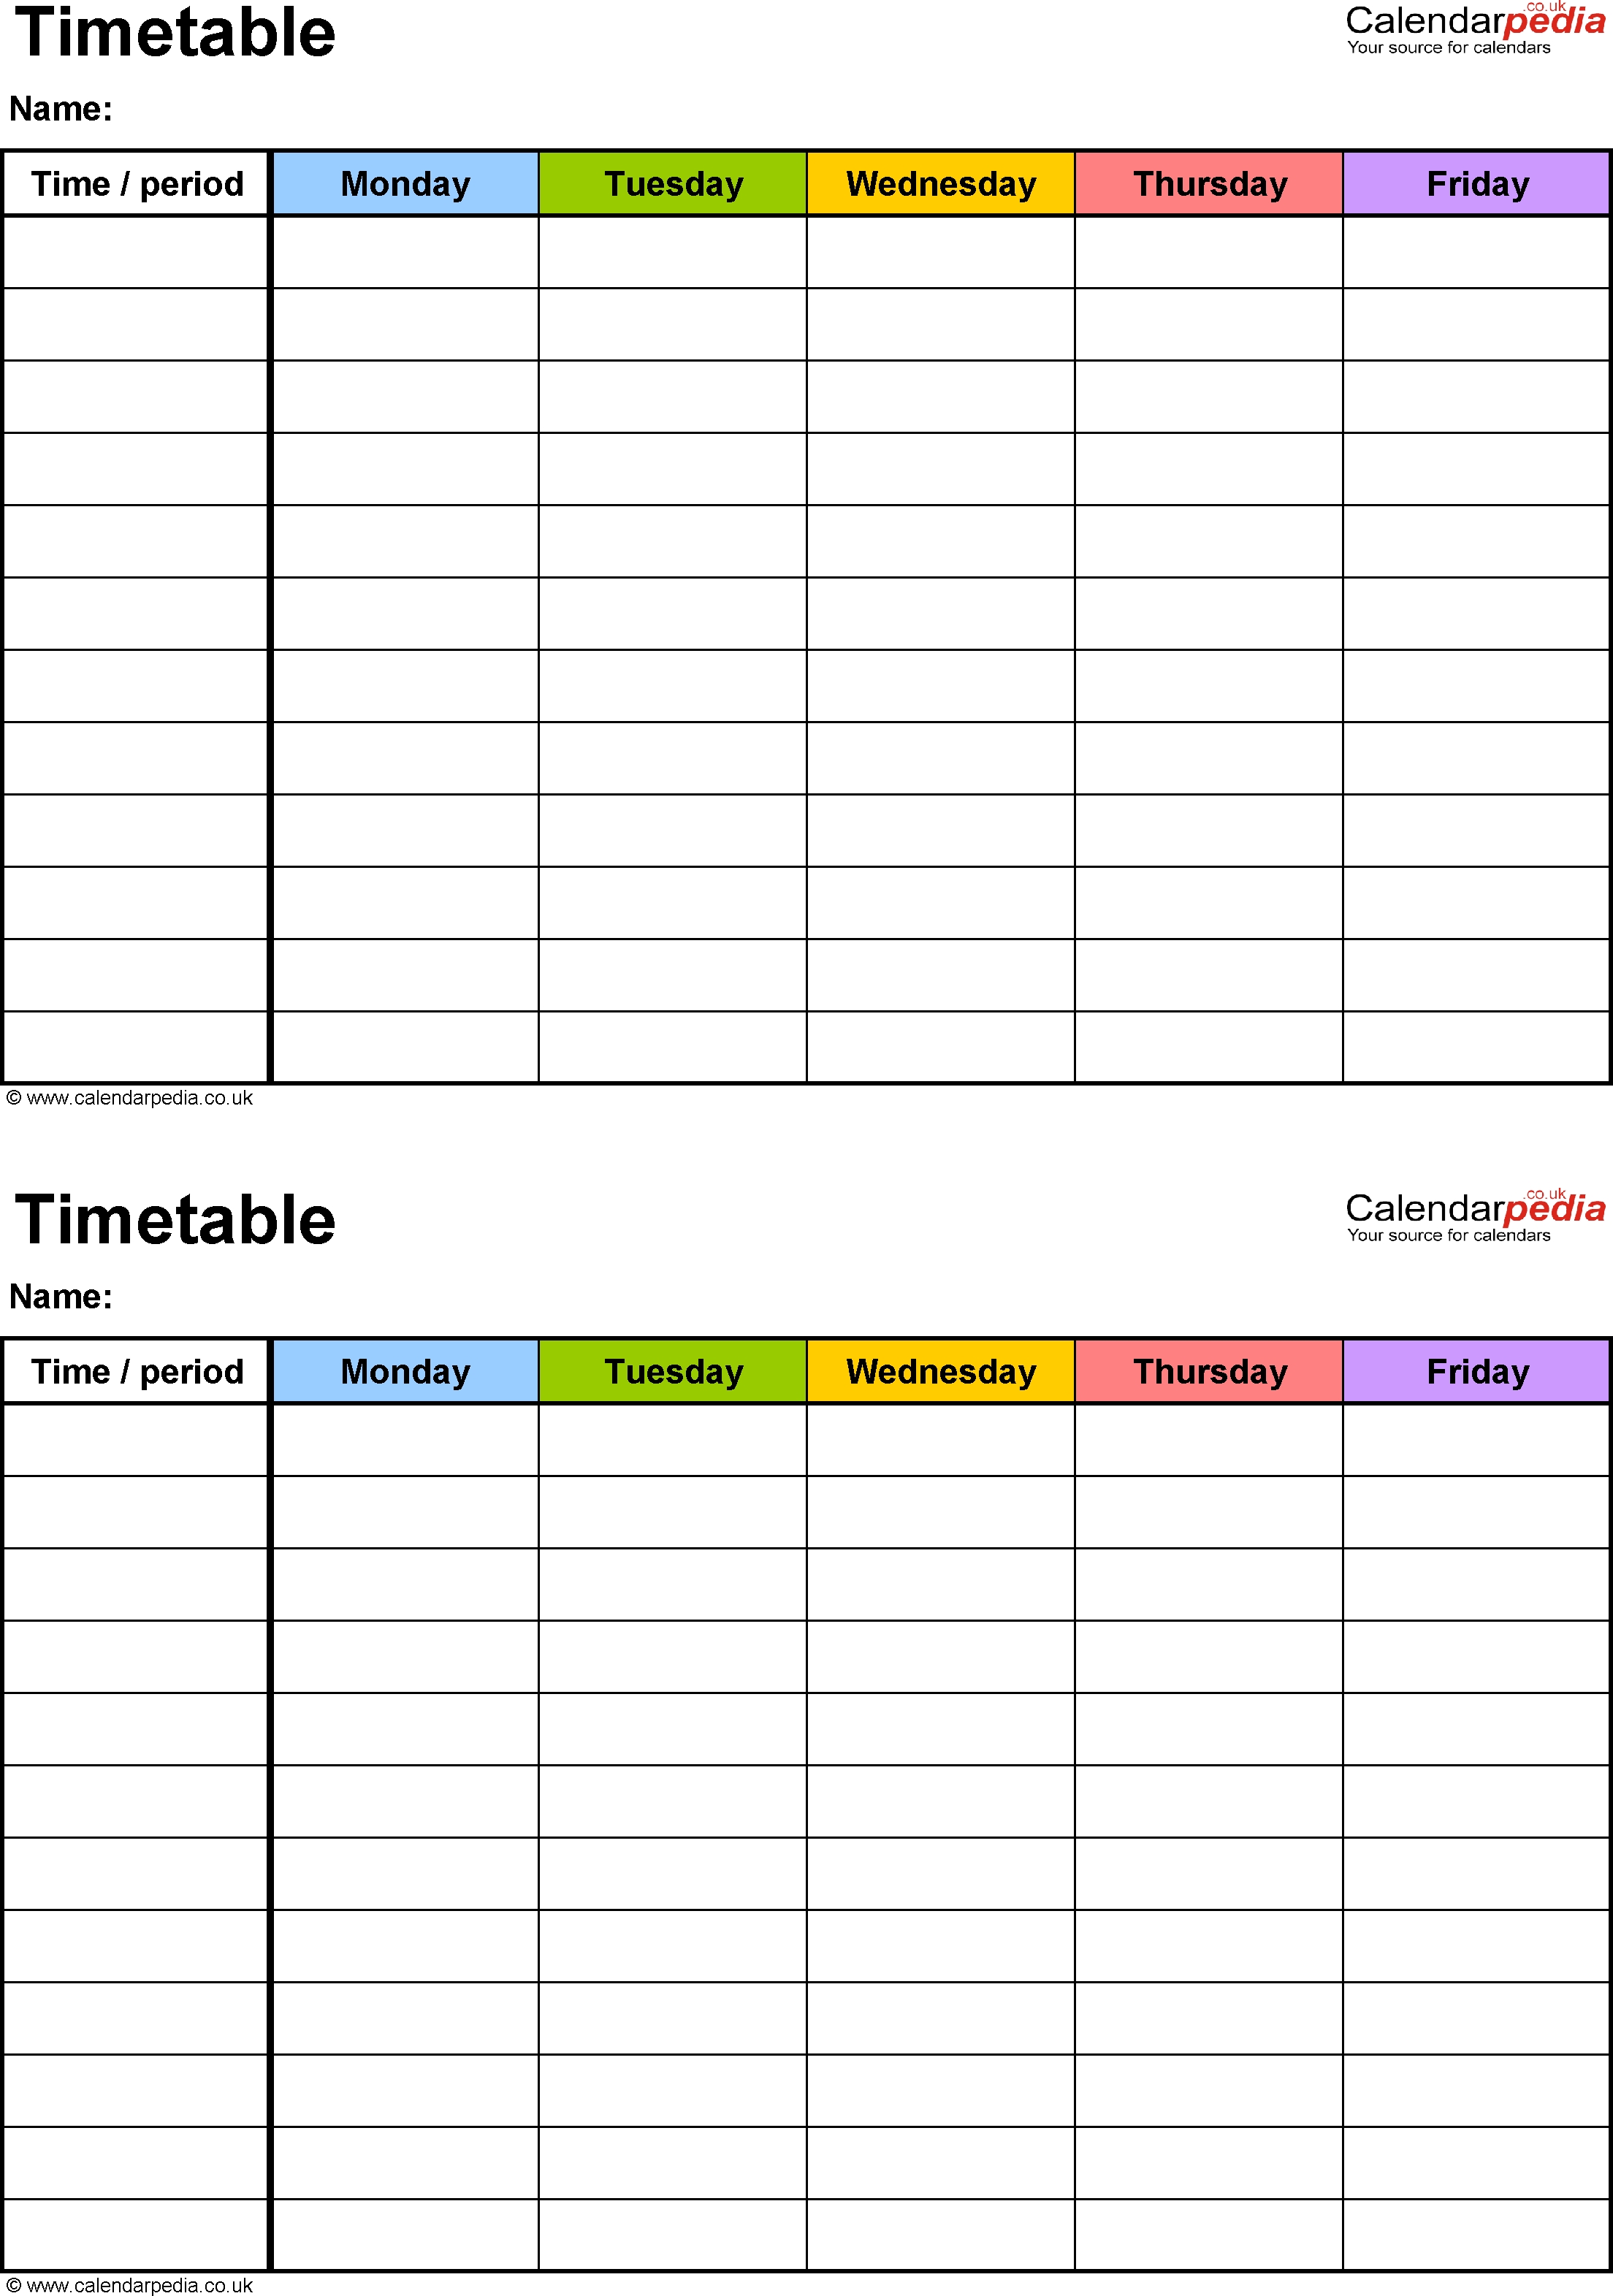 Excel Timetable Template 6: 2 A5 Timetables On One Page, Portrait regarding 5 Day Week Monthly Calendar Templates